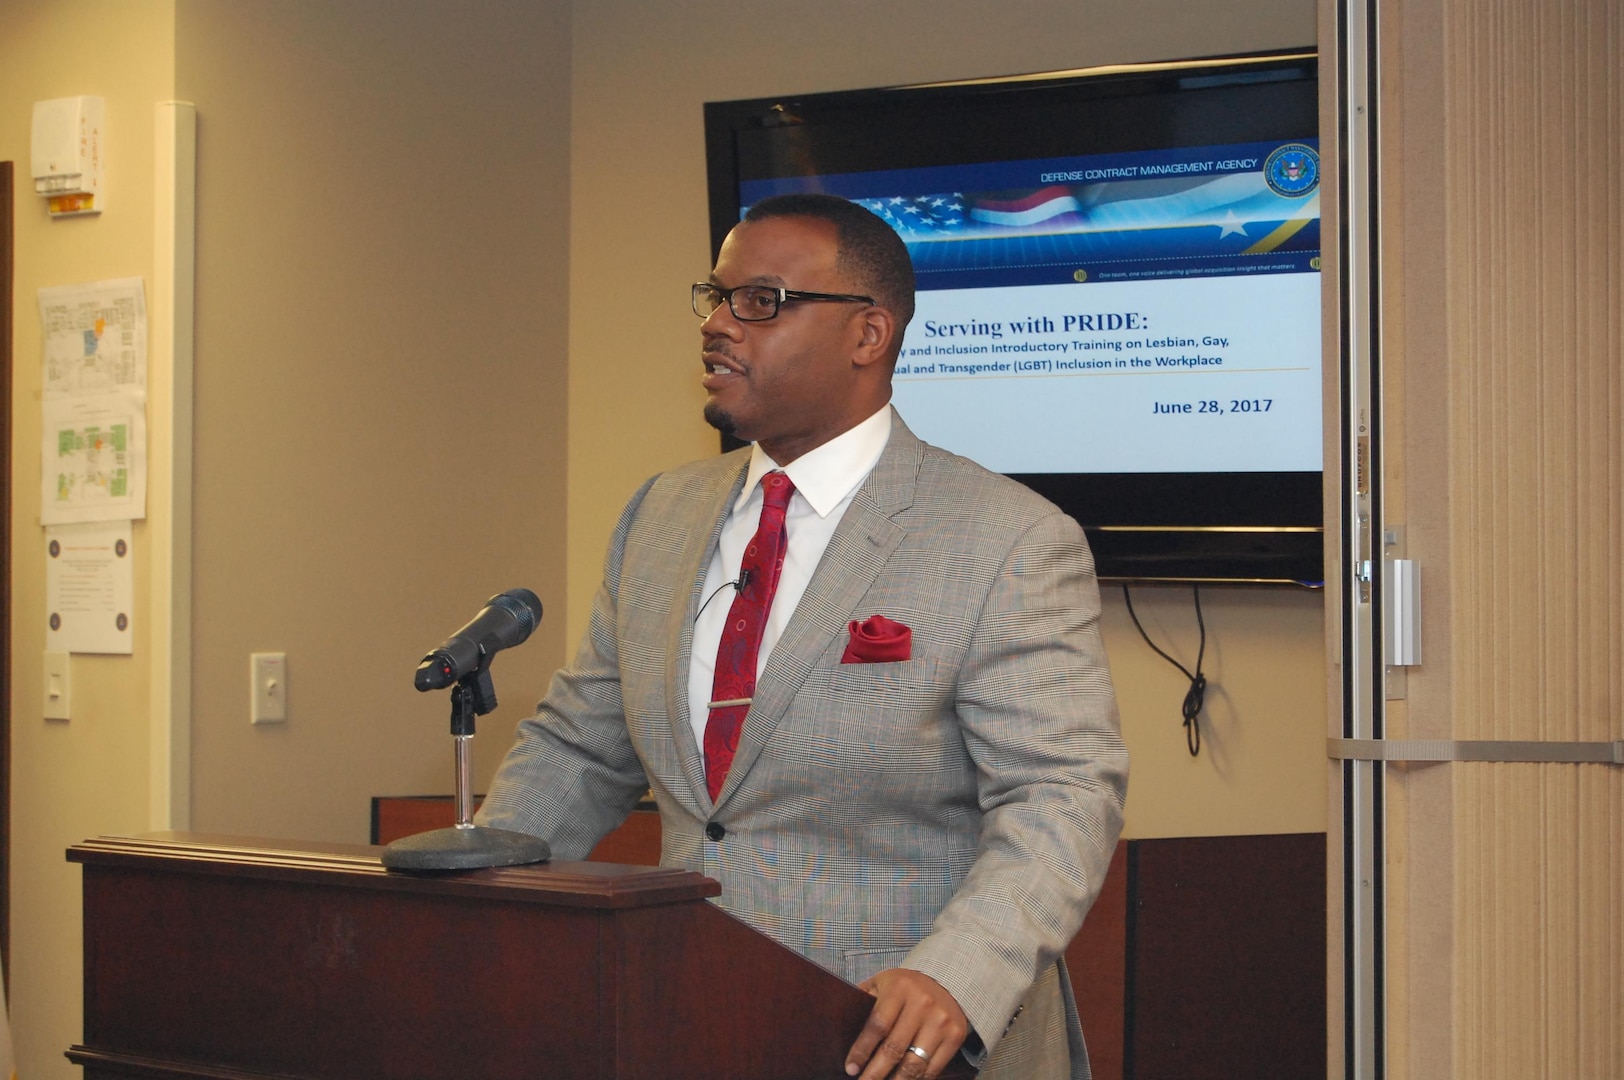 George P. Braxton, Defense Contract Management Agency’s special advisor for Diversity and Inclusion, spoke during the agency’s Lesbian, Gay, Bisexual, Transgender Pride Month’s Lunch and Learn June 28. He emphasized the agency is a model, inclusive workplace where all employees are respected. (DCMA photo)